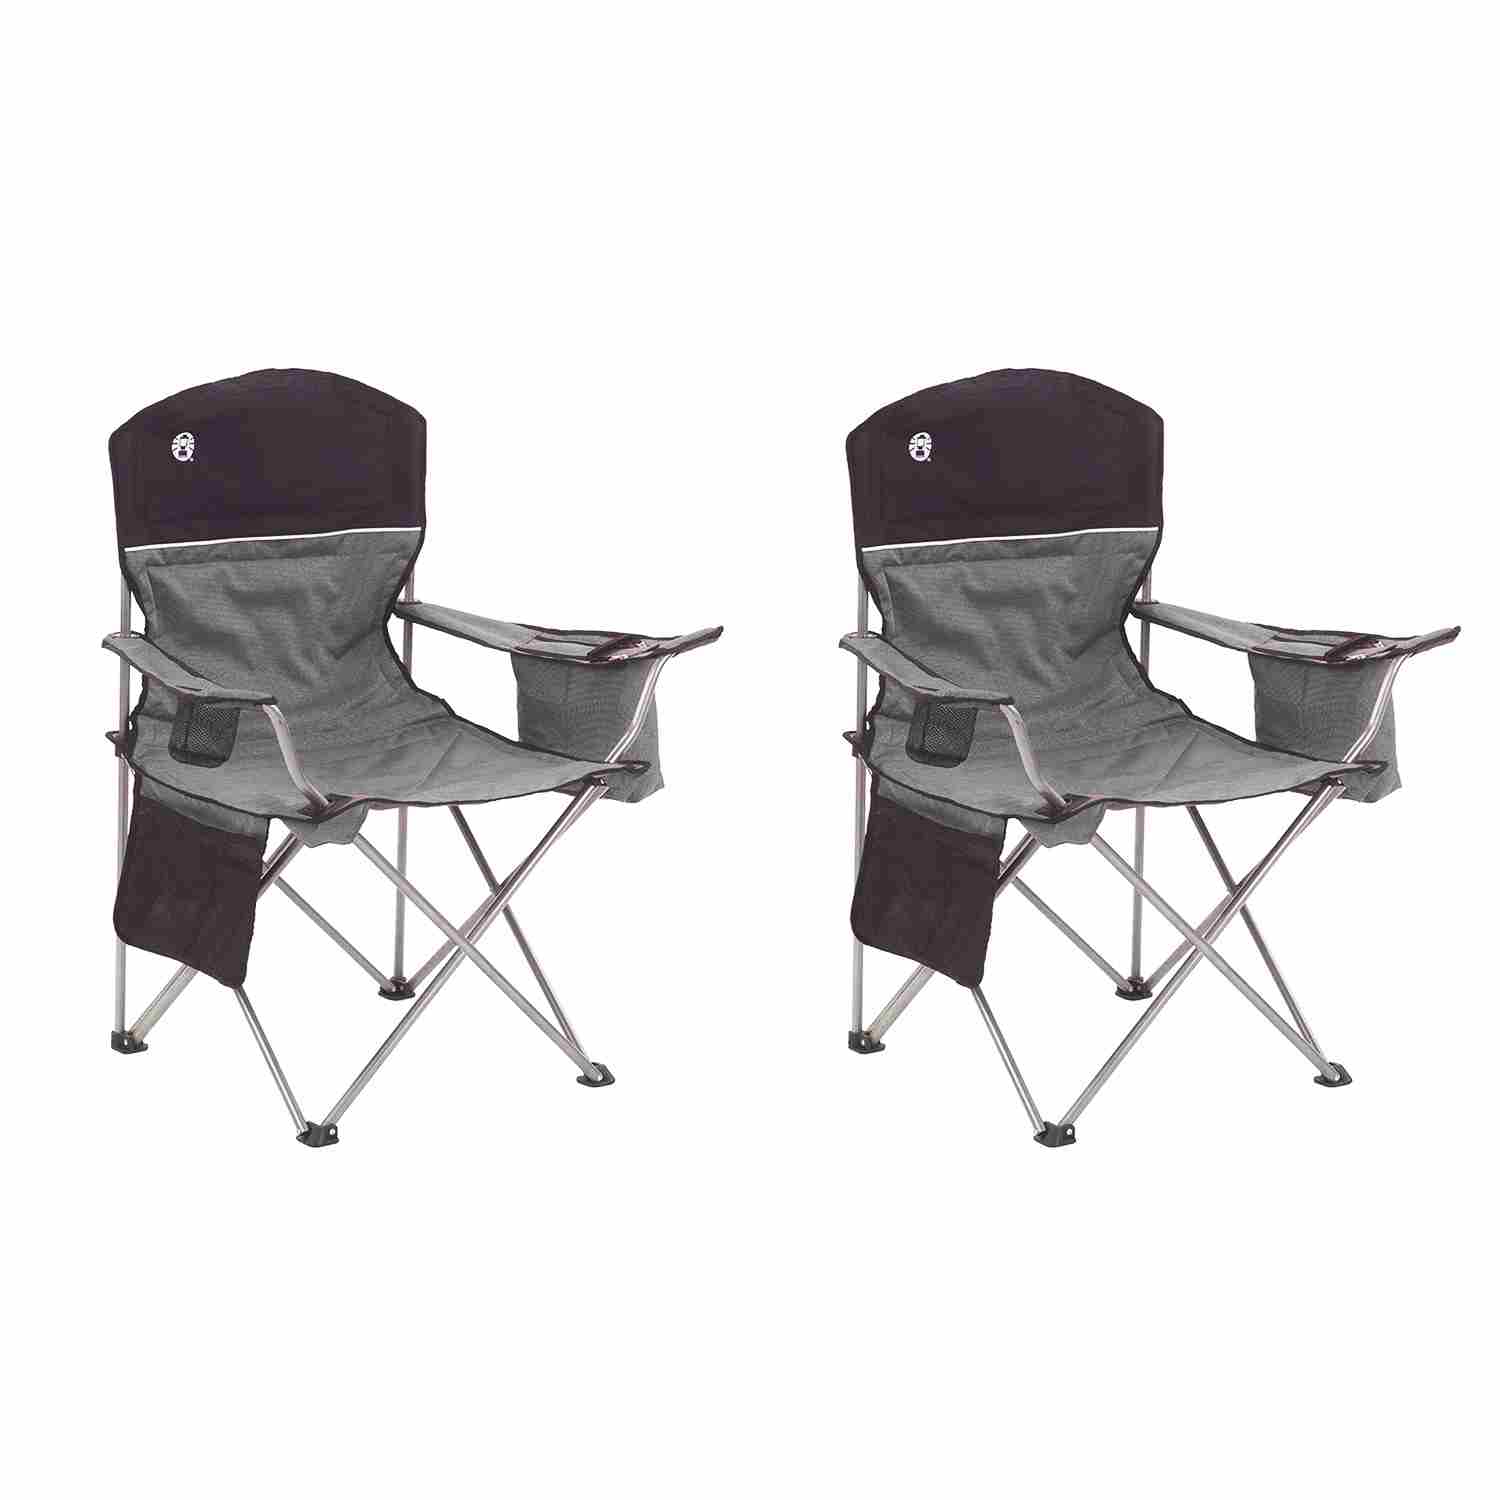 coleman-oversized-halfords-camping-chair